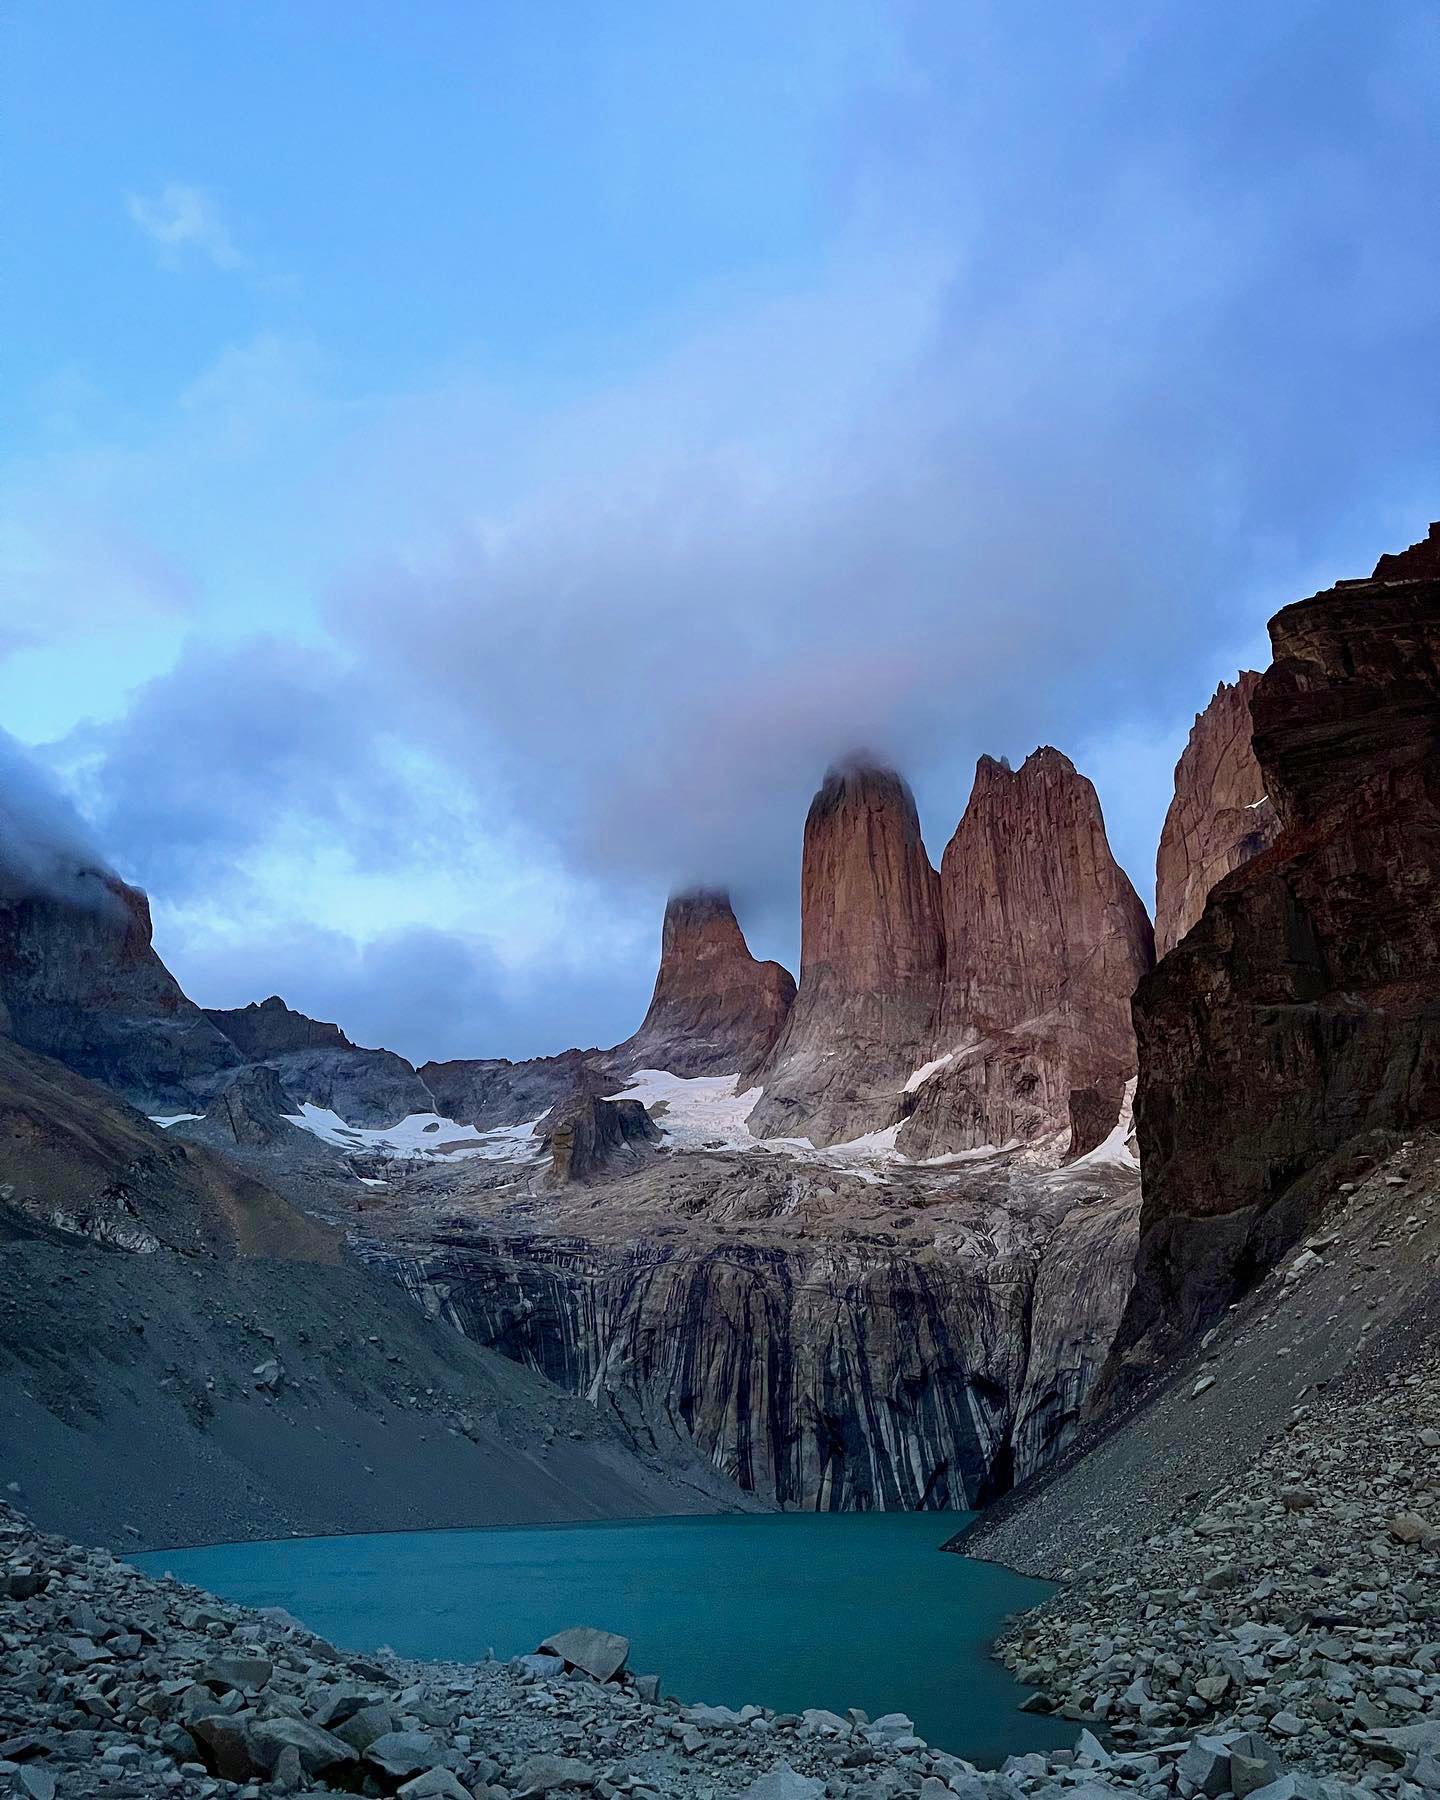 A Guide to Hiking Chile’s W Trek in Torres del Paine